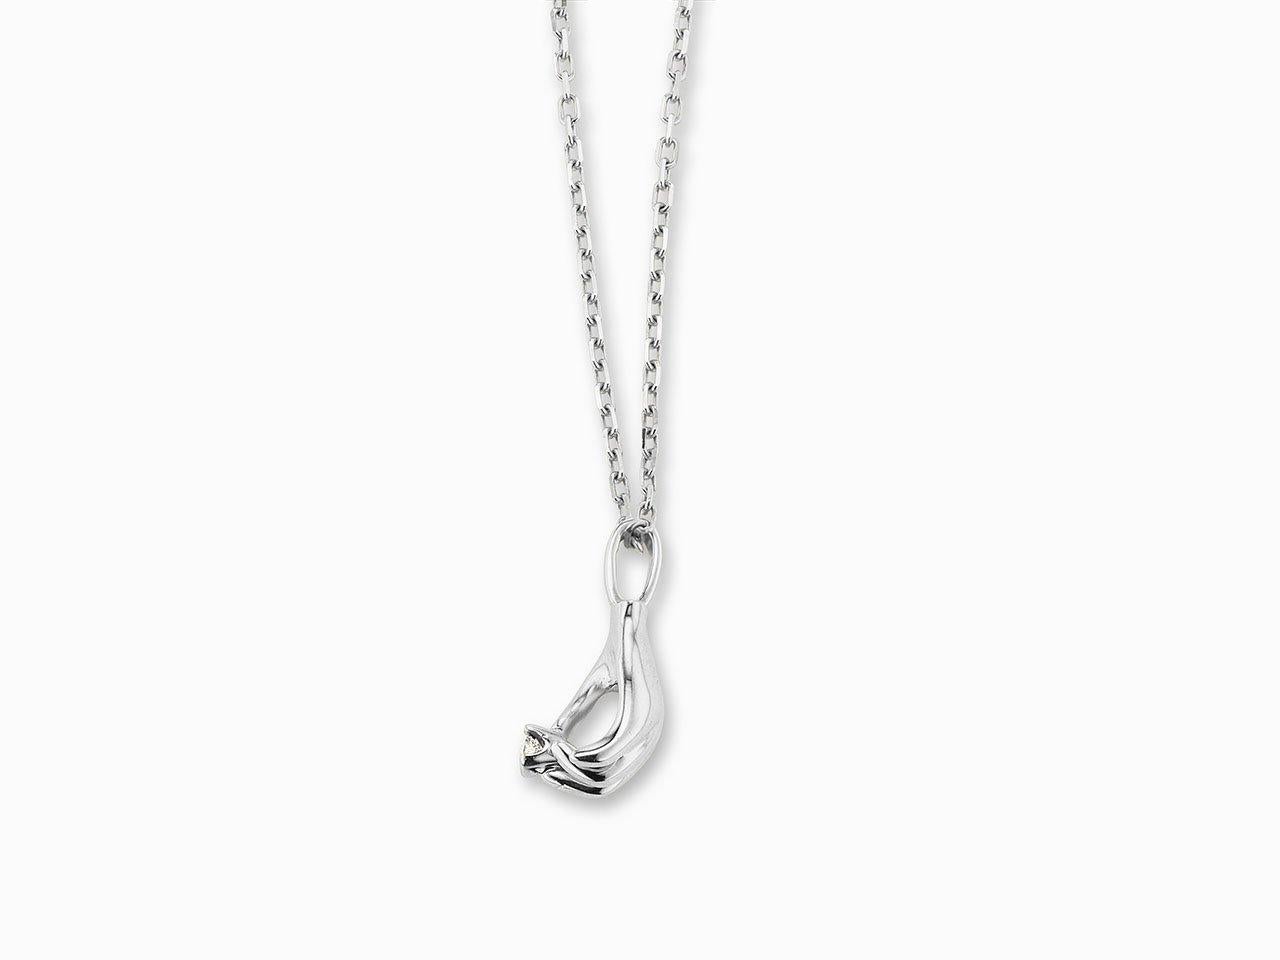 MANIAMANIA 'La Magicienne'  necklace in 14k White Gold, with hand motif pendant (22mm) holding a 3mm white diamond (0.1ct), on 14k white gold elongated cable chain (20 inch long).

A graceful hand charm pendant shows off a fiery white diamond in